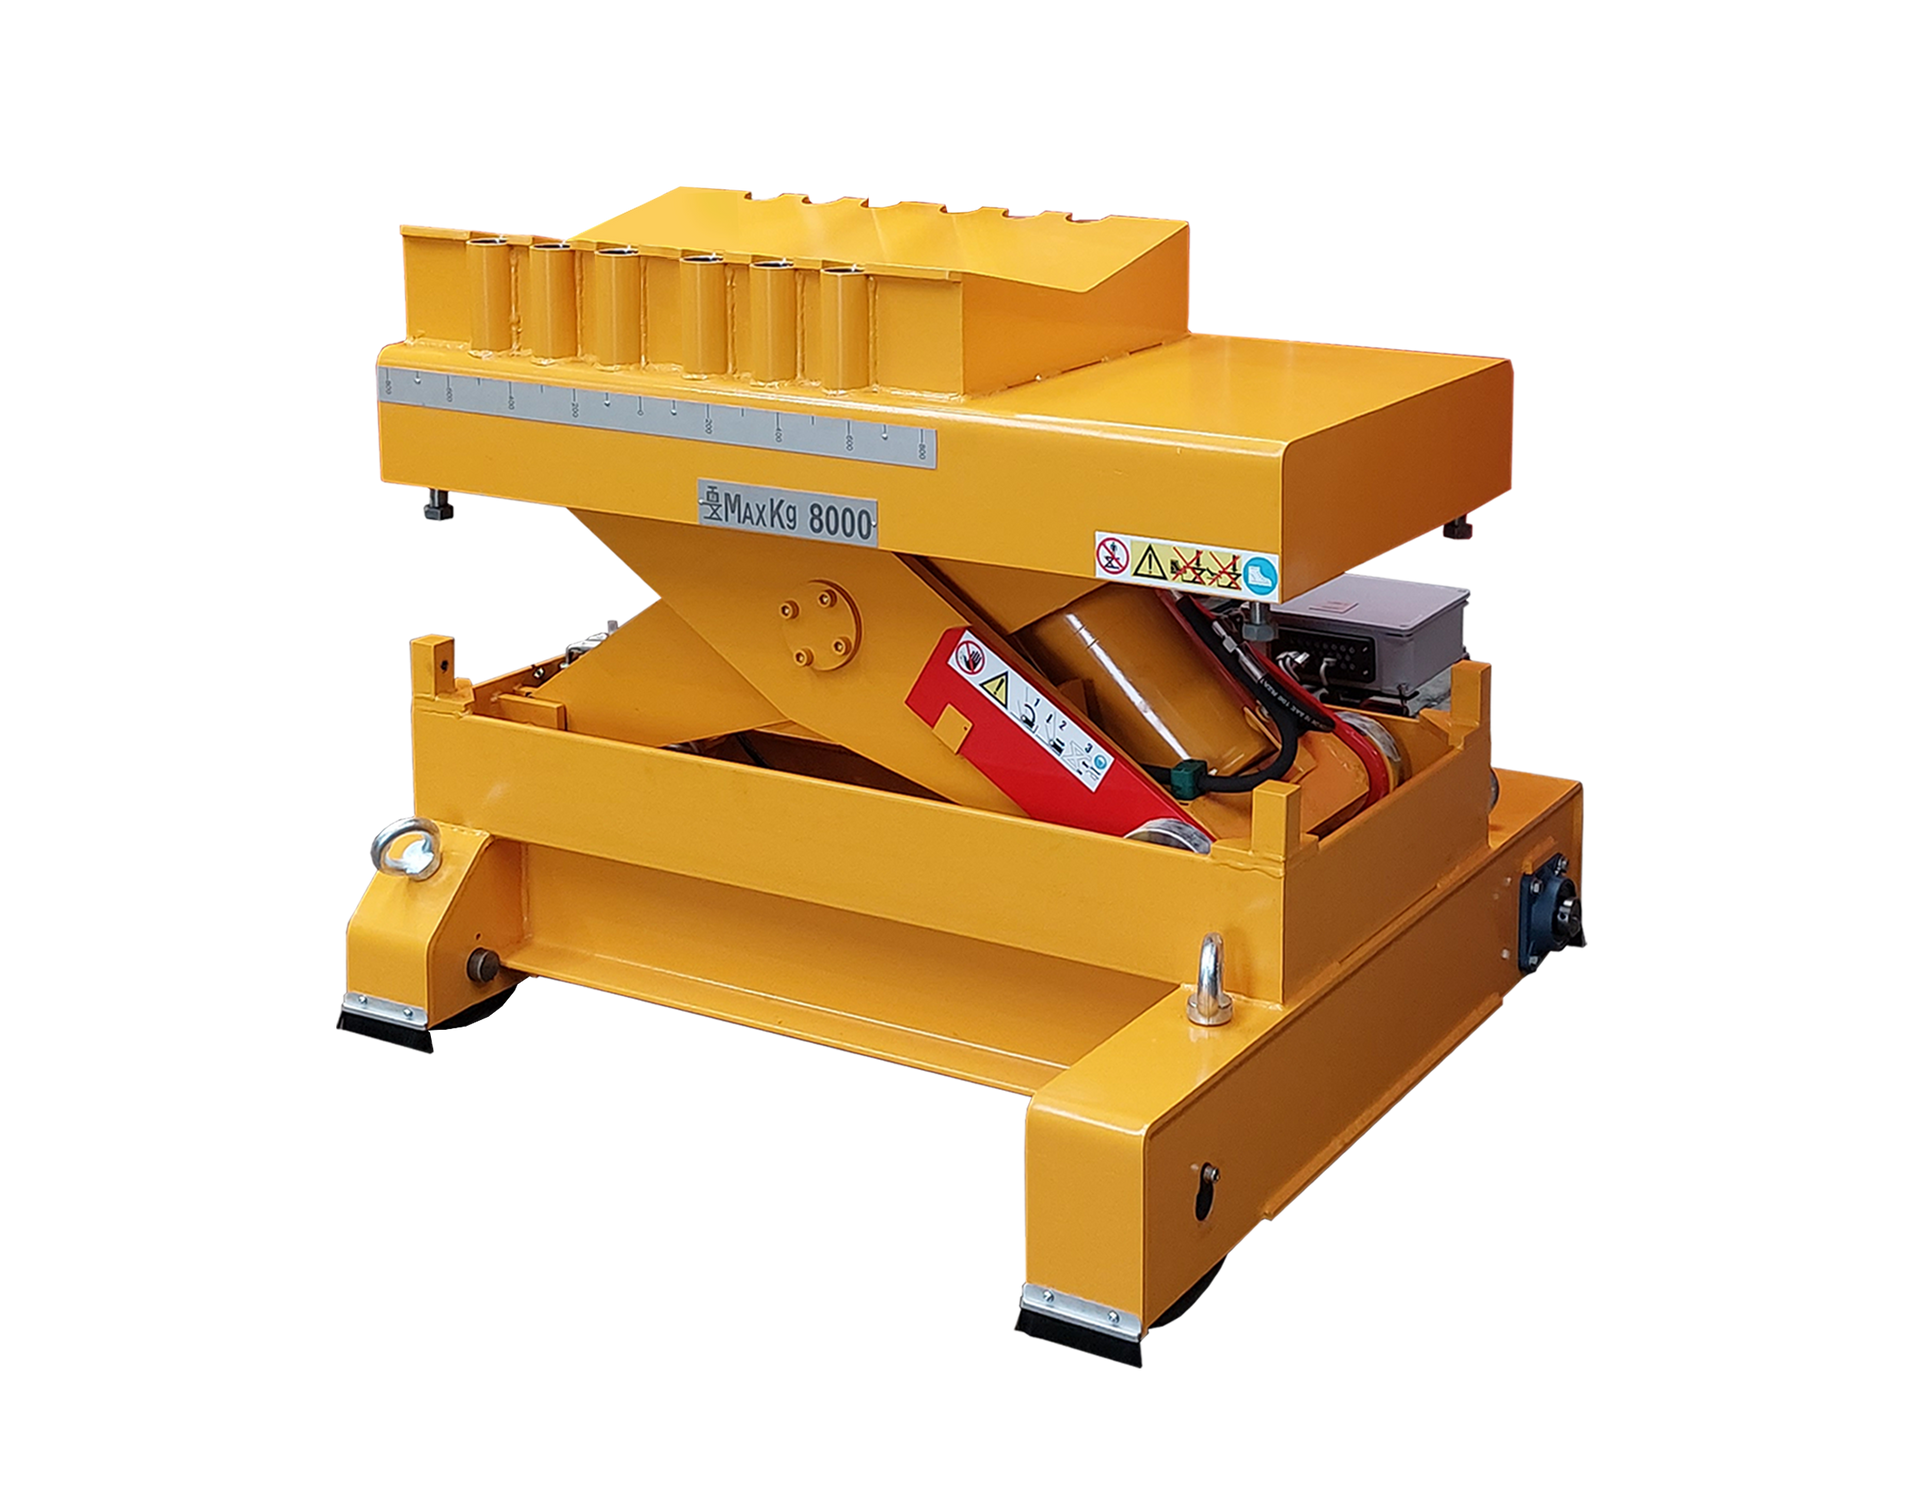 Lift table with cradle V top, Lifting platform for coil handling and side motorized propulsion, Coil car with adjustable holds for coils of various sizes